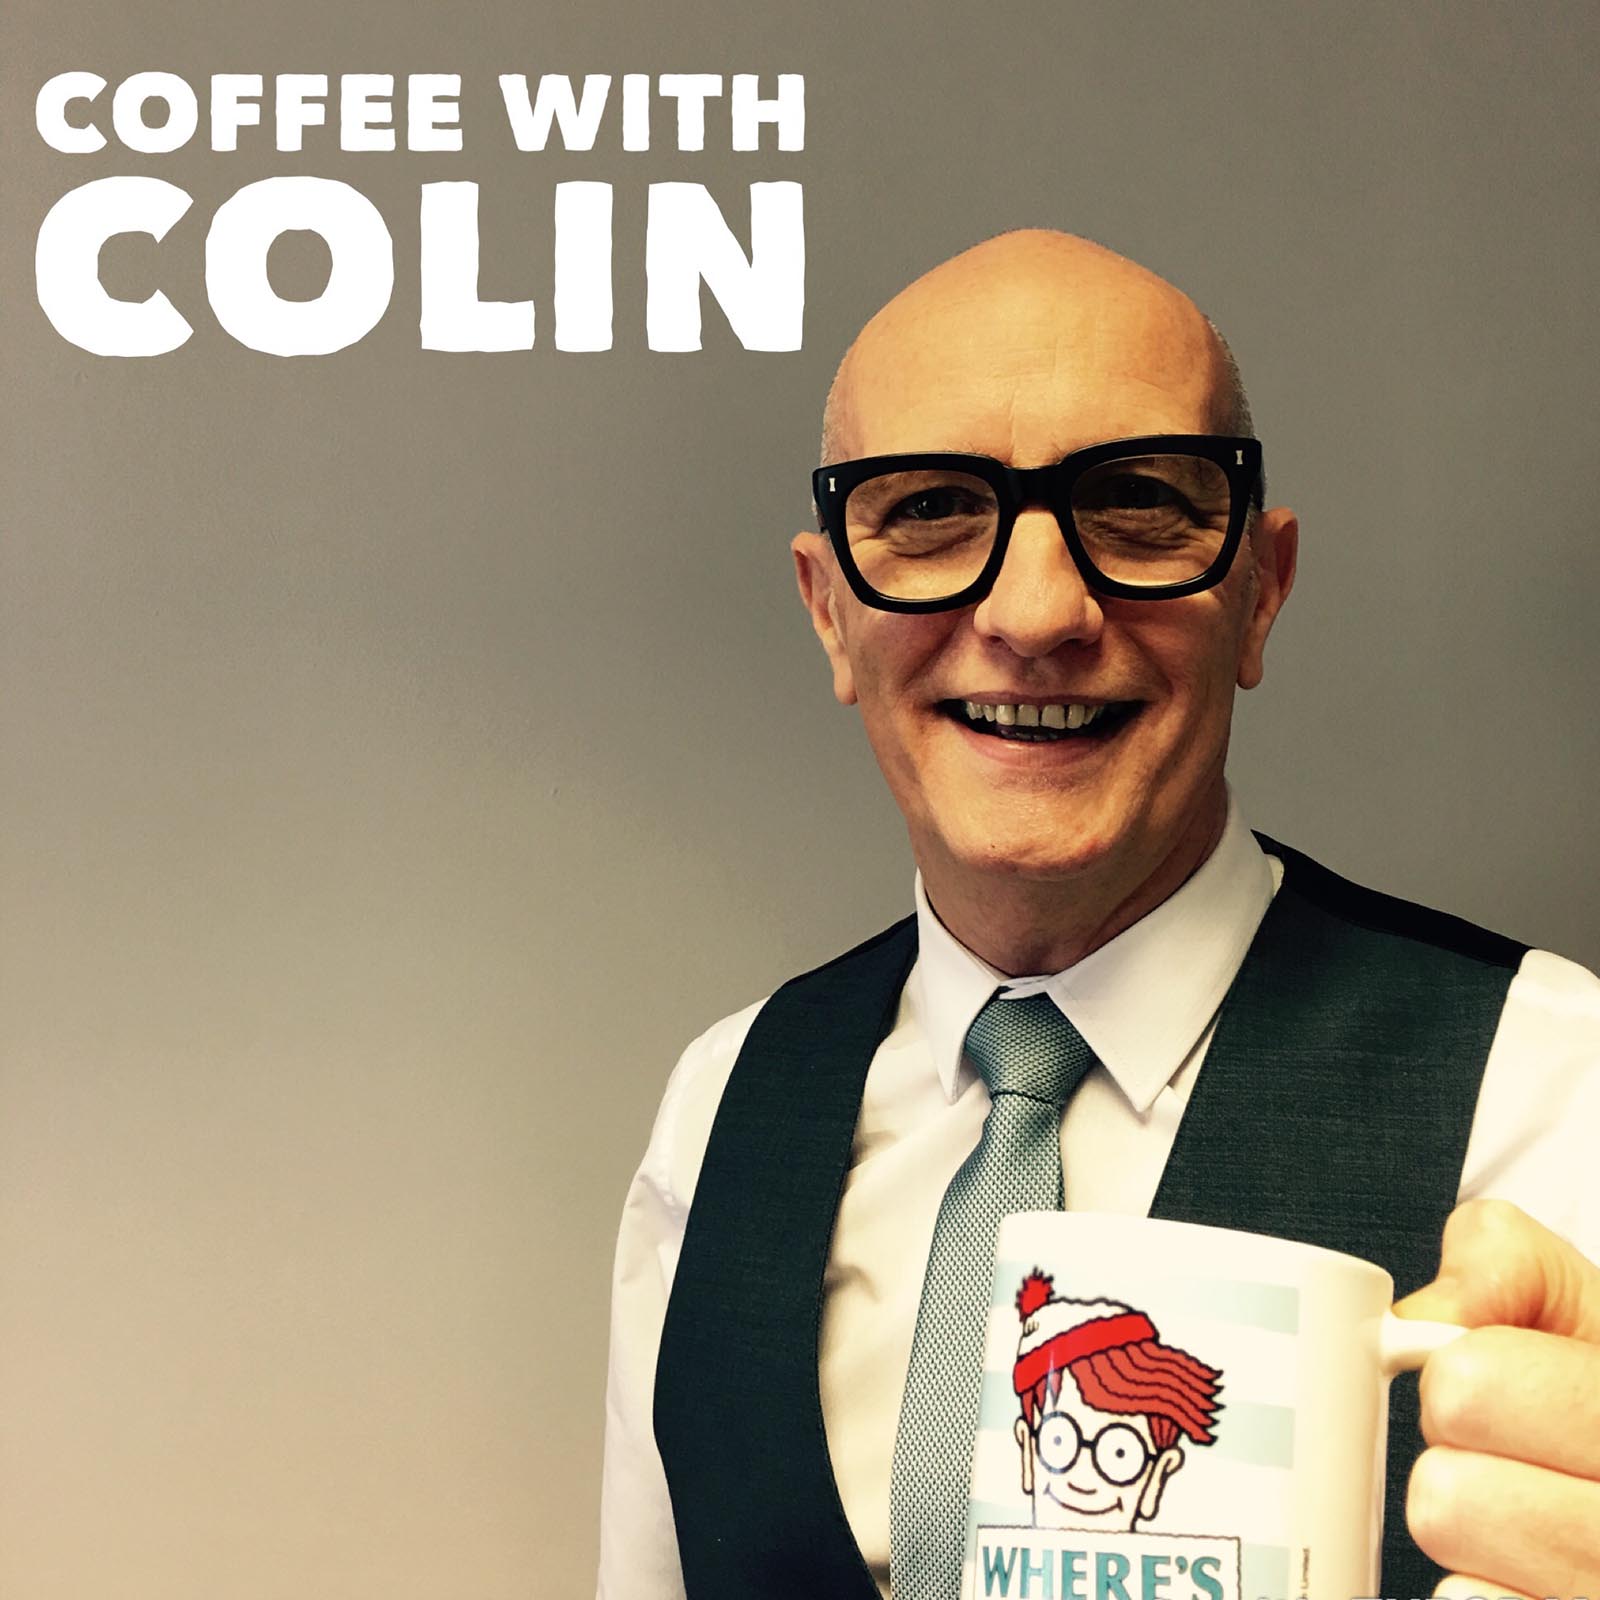 MAGHERAFELT AND LDERRY - HAVE A COFFEE WITH COLIN THIS WEEK